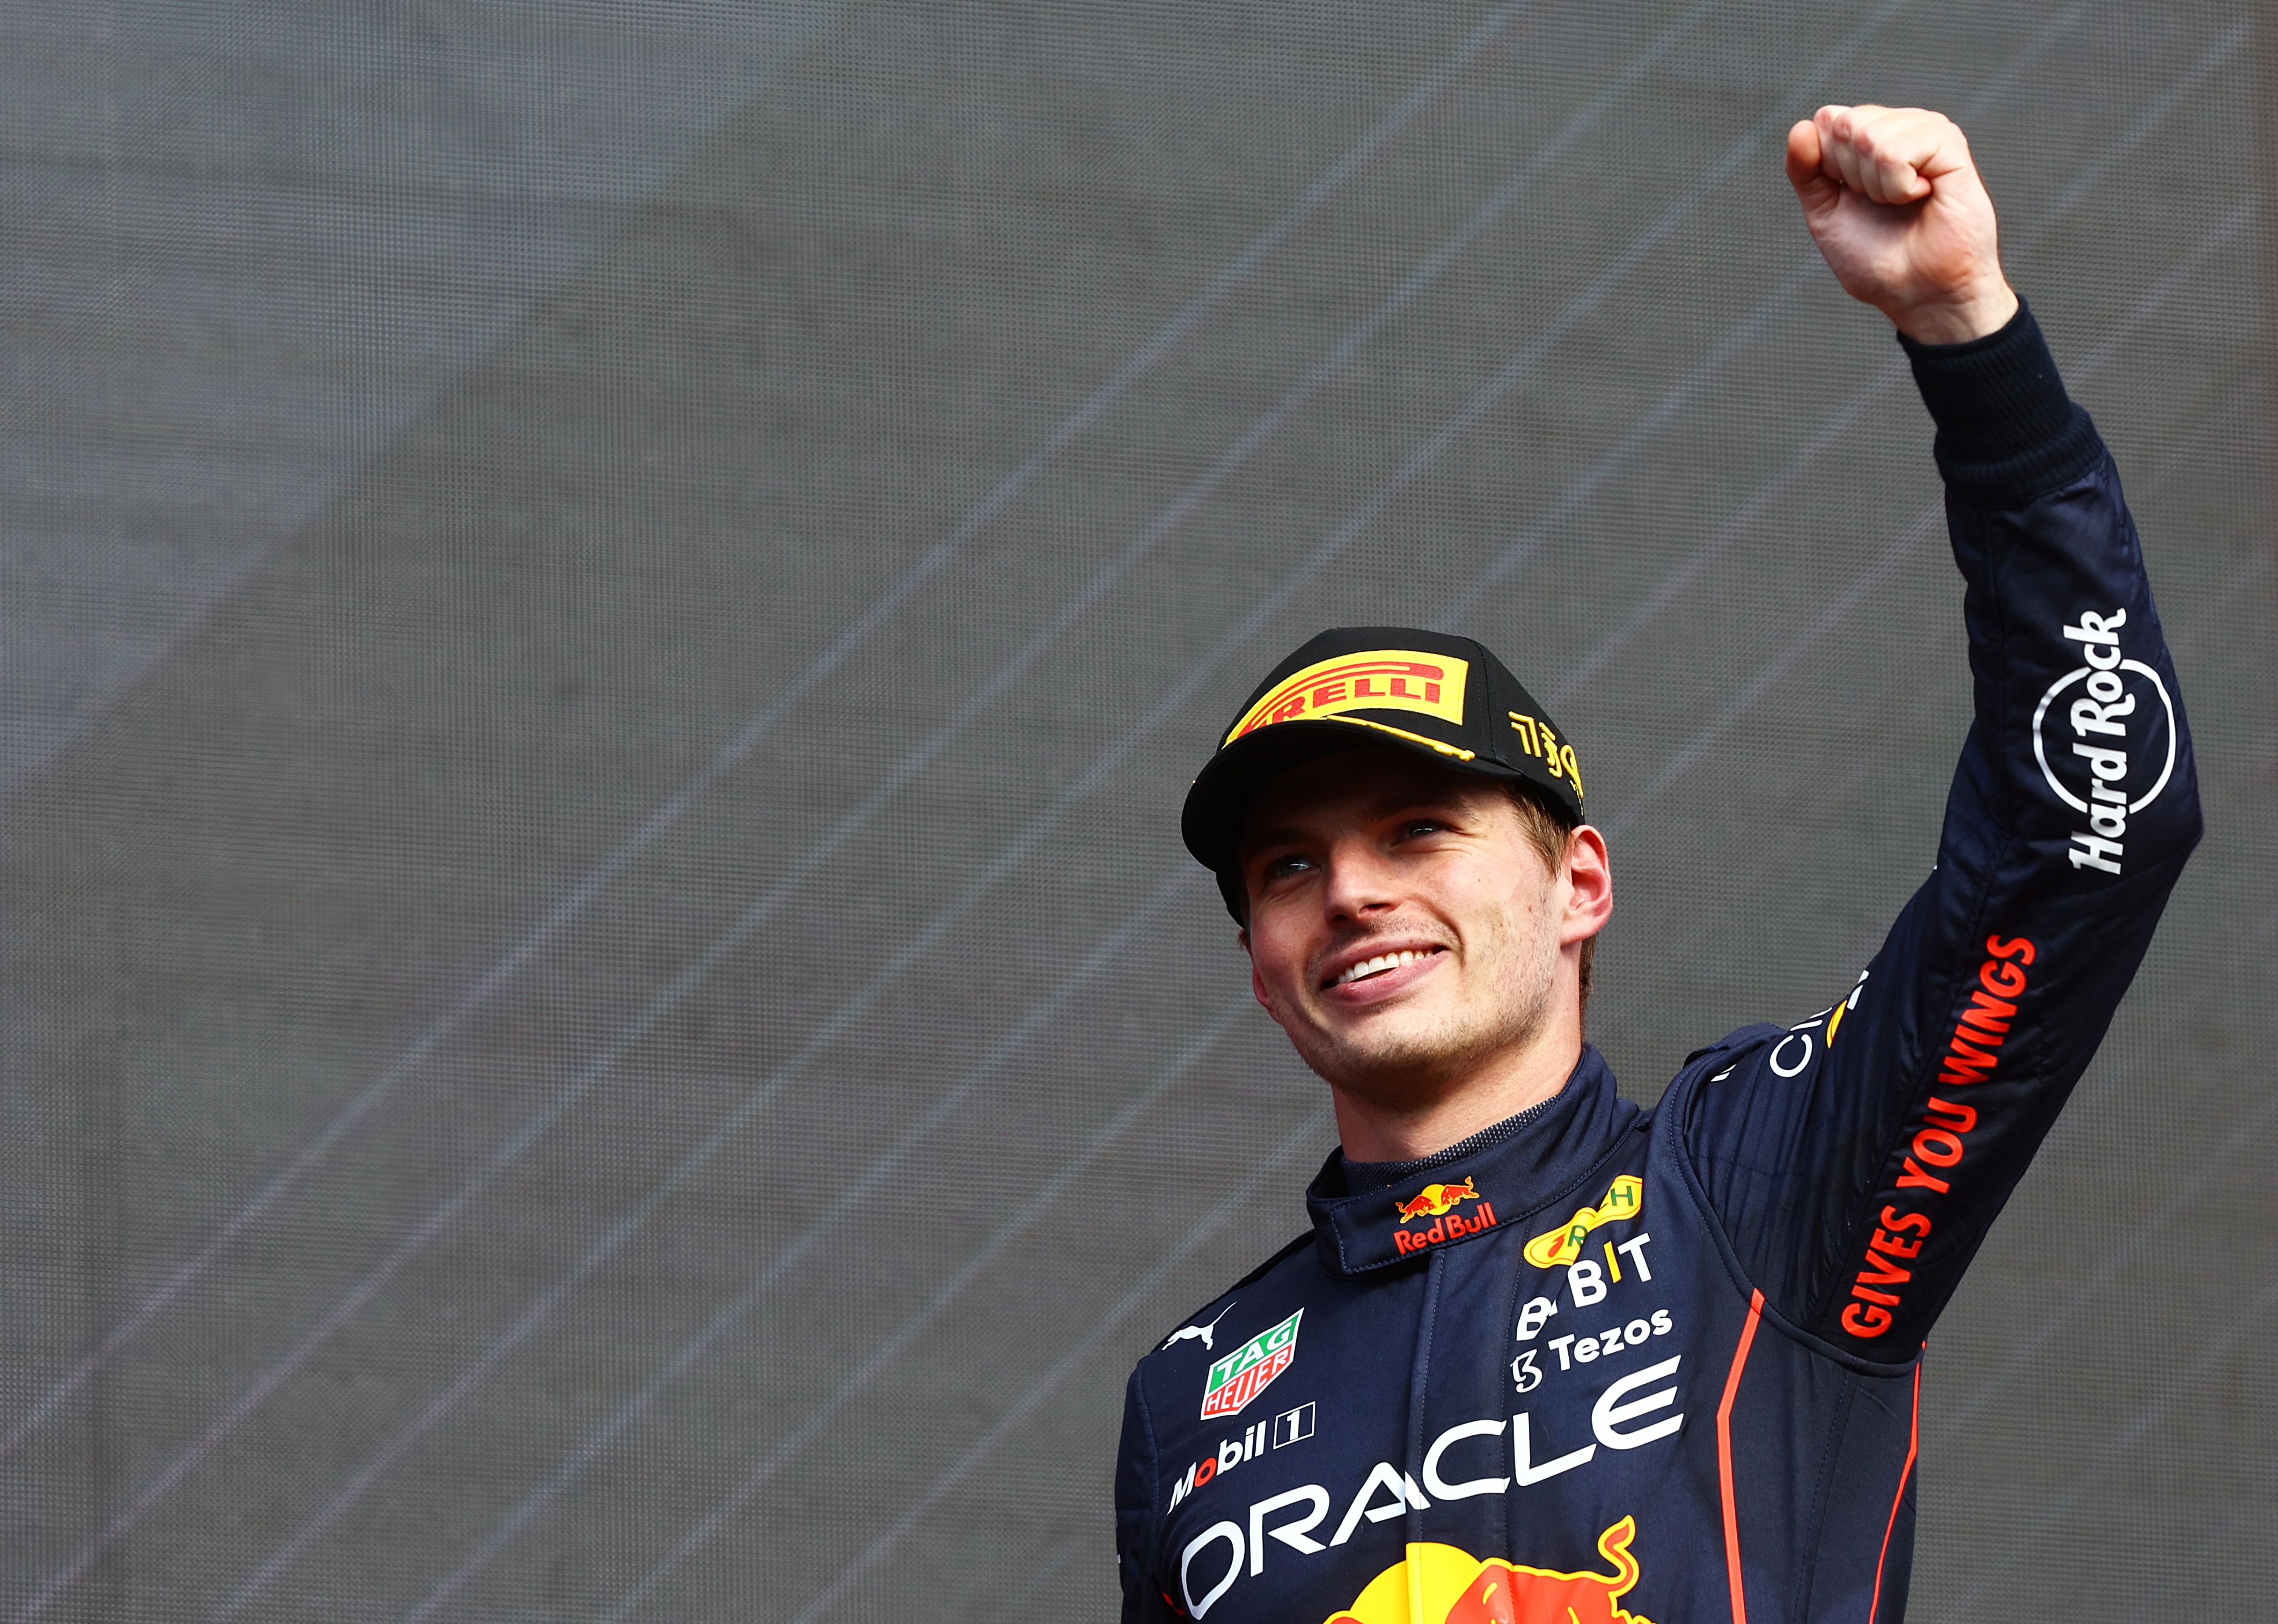 camera Mier Permanent Max Verstappen comes from starting 14th to win Belgian Grand Prix | CNN